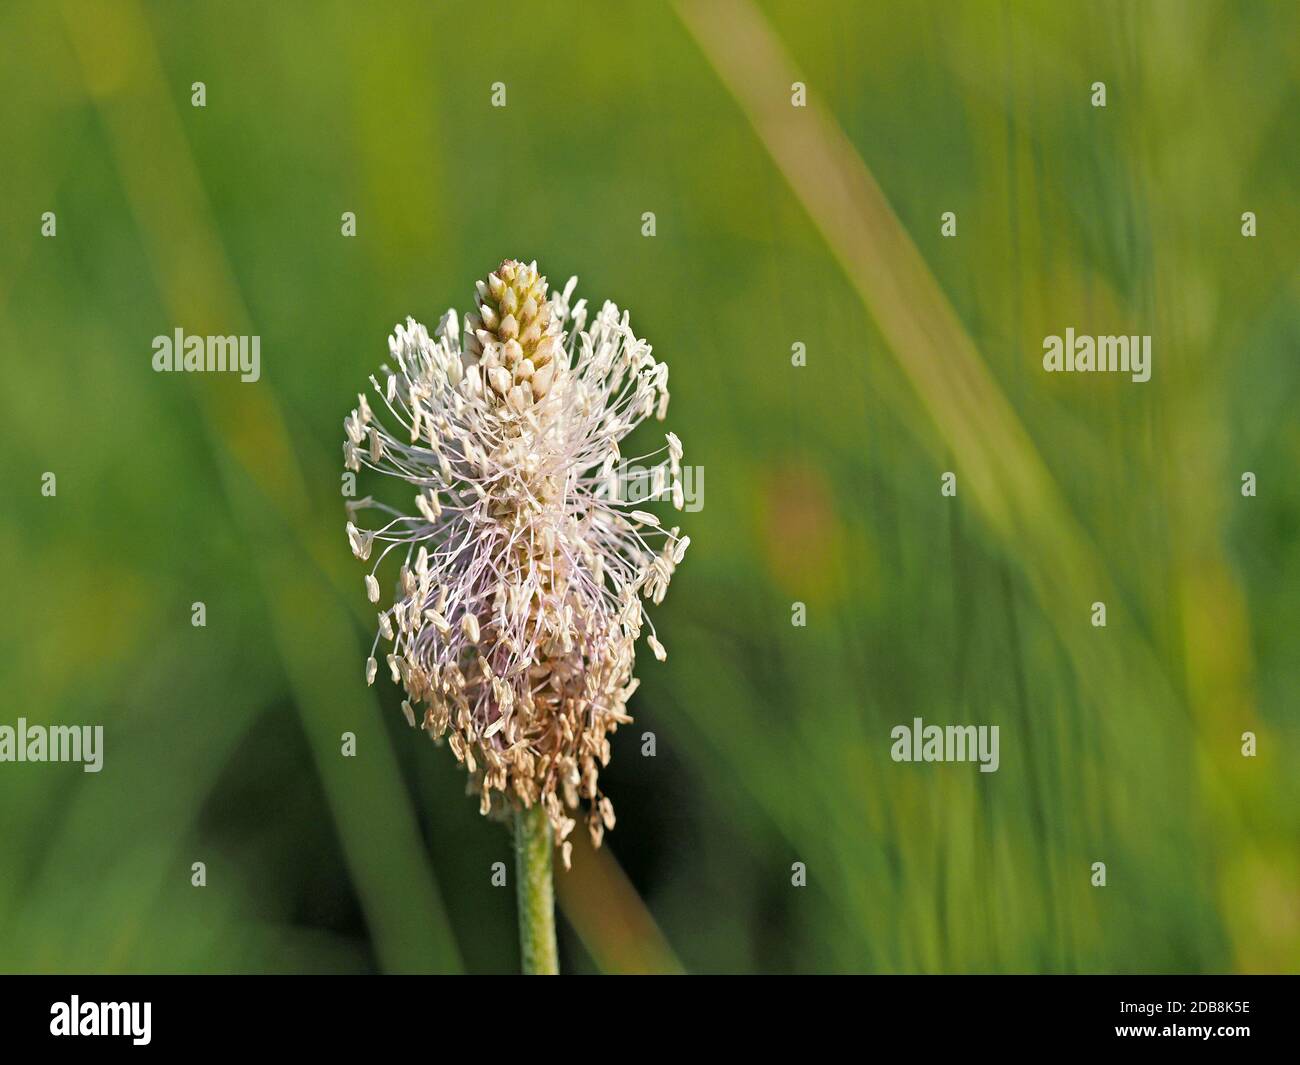 detail of sunlit flowerhead of Hoary Plantain (Plantago media) a Perennial herb growing in calcareous grassland in Cumbria, England,UK Stock Photo